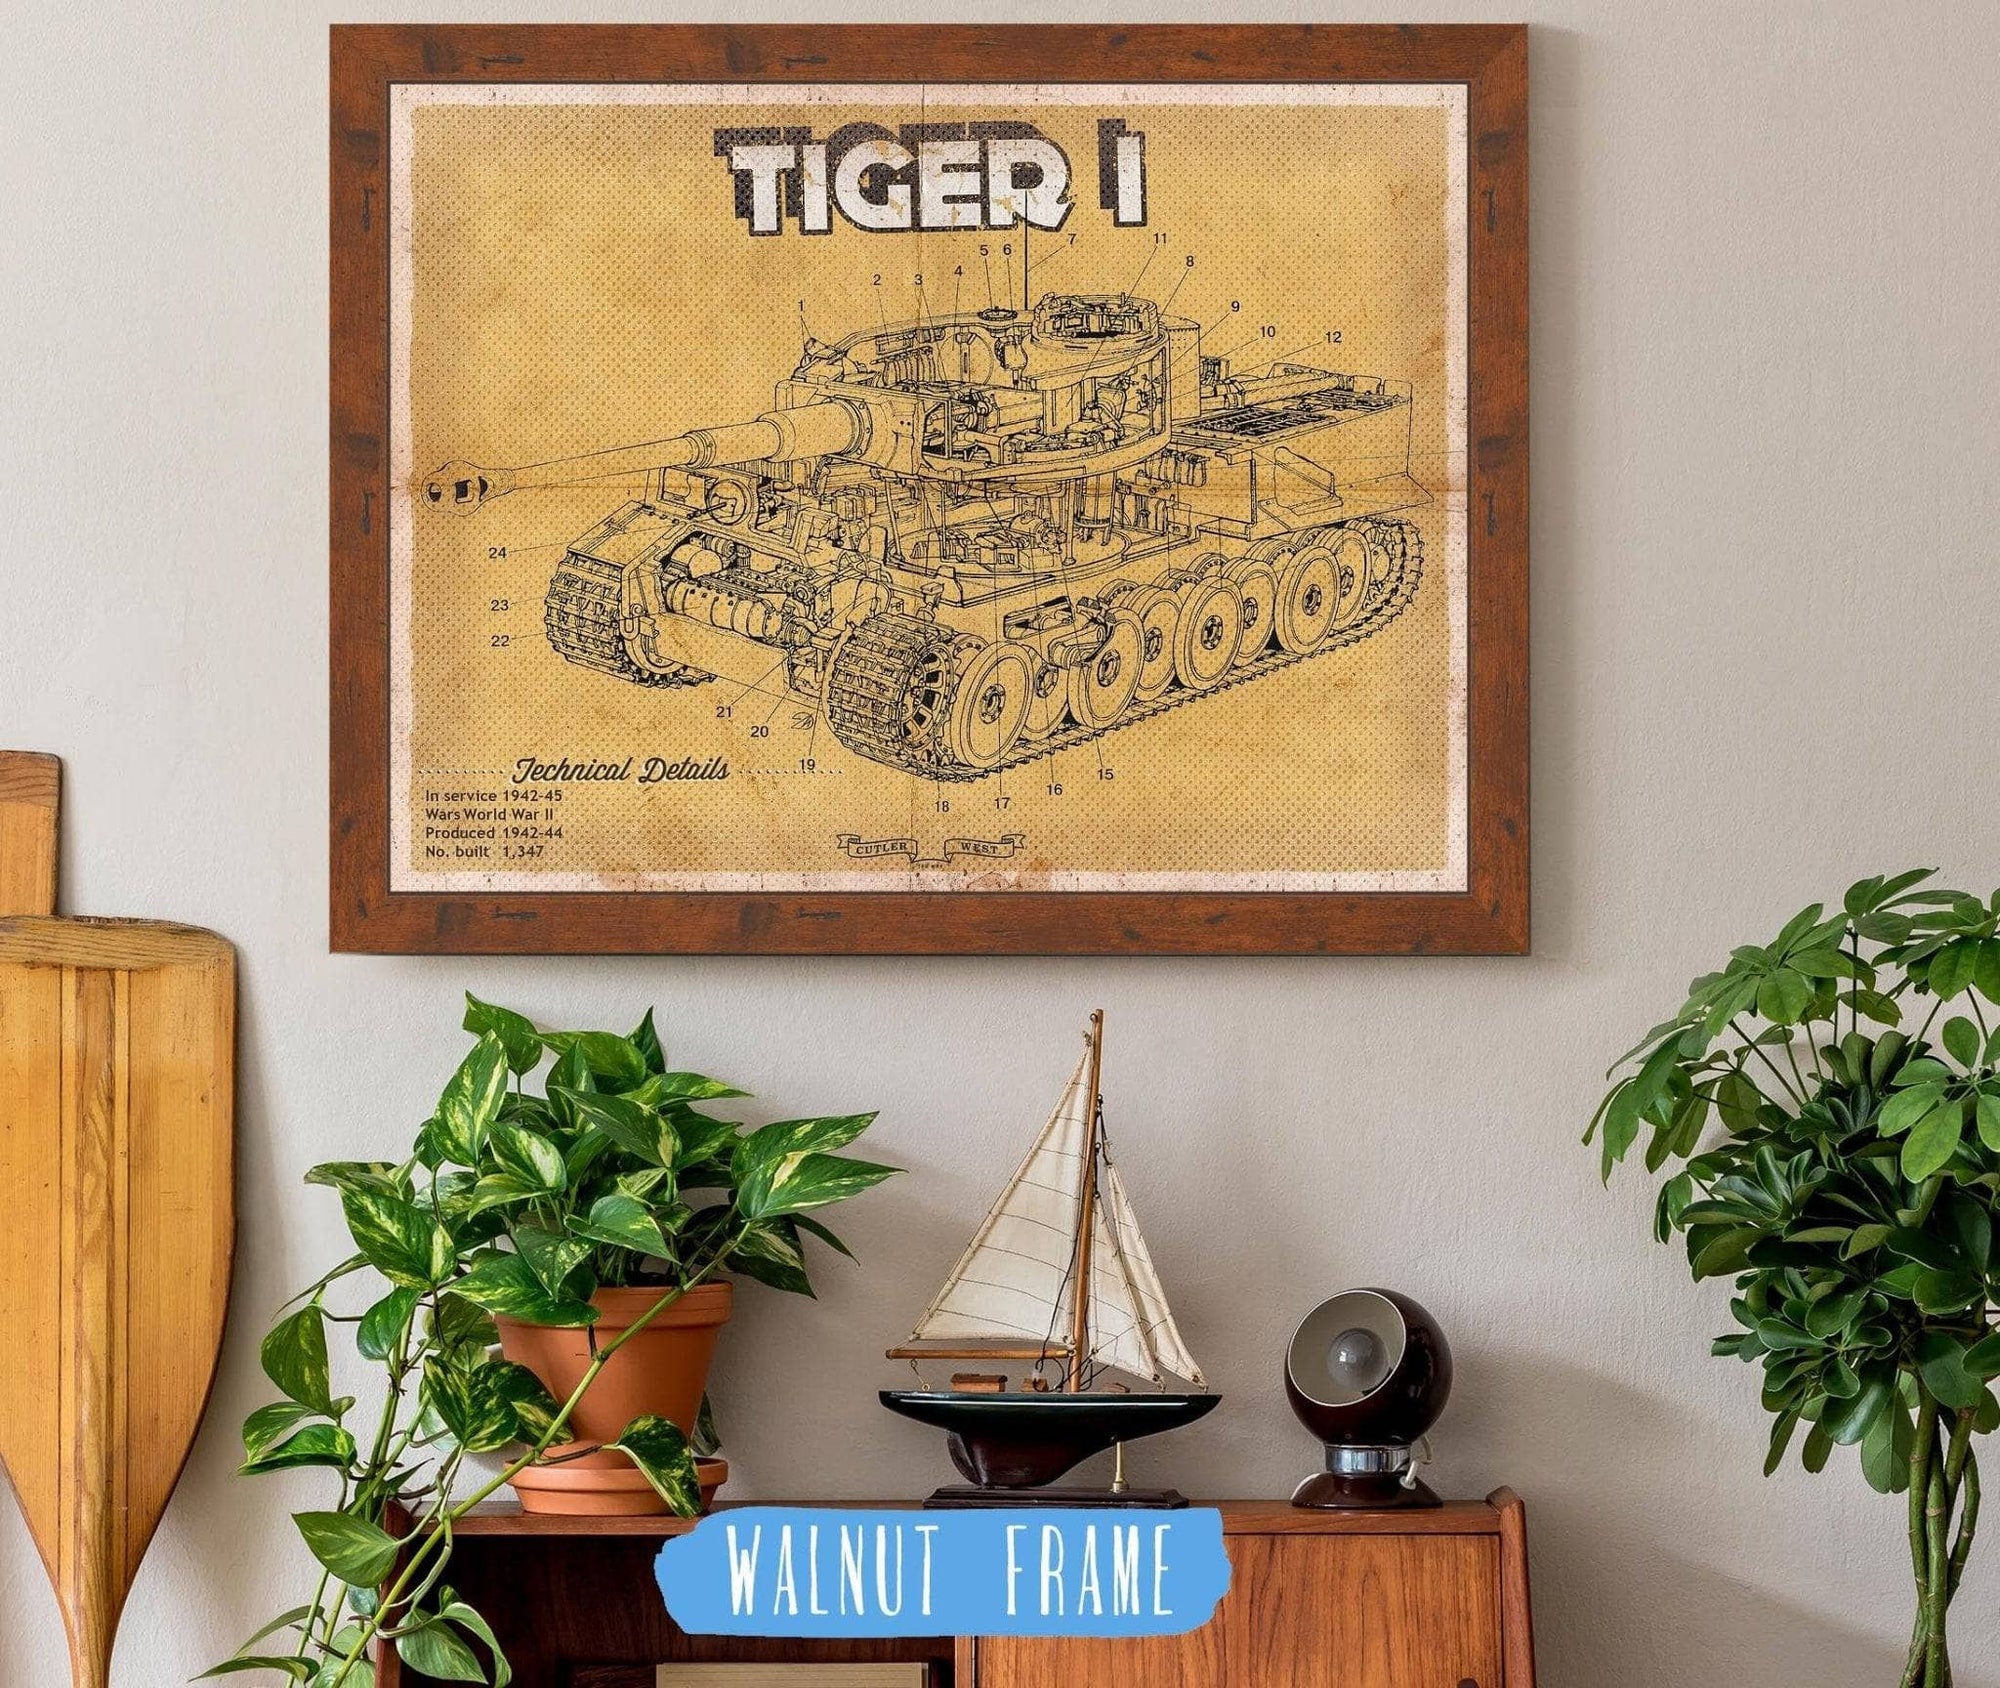 Cutler West Military Weapons Collection 14" x 11" / Walnut Frame Tiger I Vintage German Tank Military Print 715557733_25195